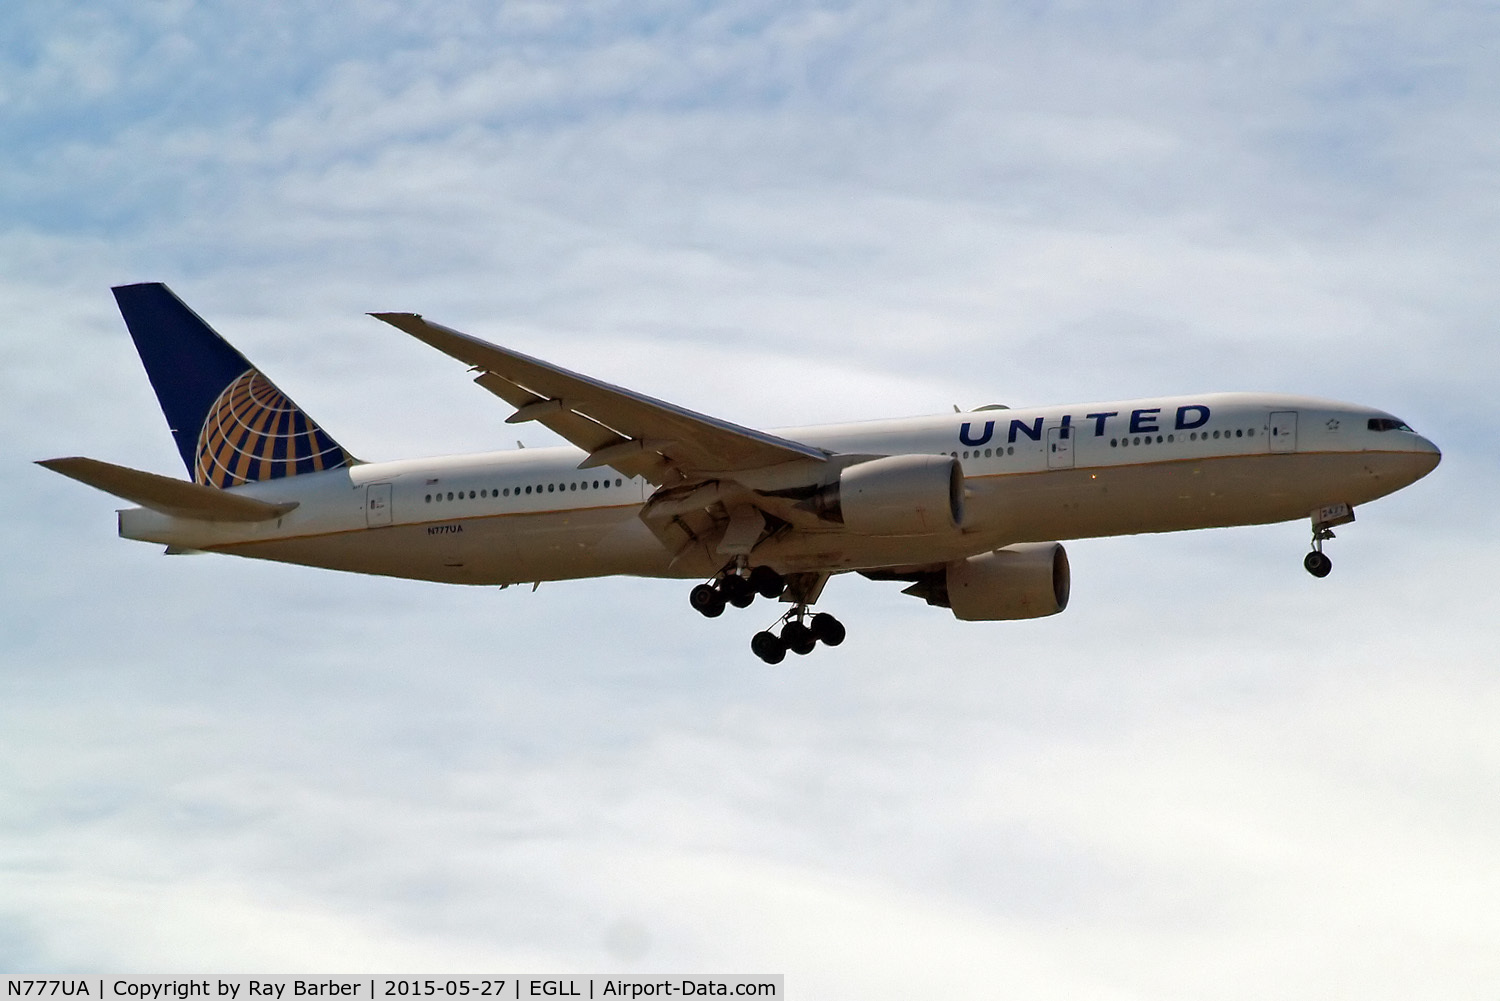 N777UA, 1995 Boeing 777-222 C/N 26916, Boeing 777-222 [26916] (United Airlines) Home~G 27/05/2015. On approach 27L.